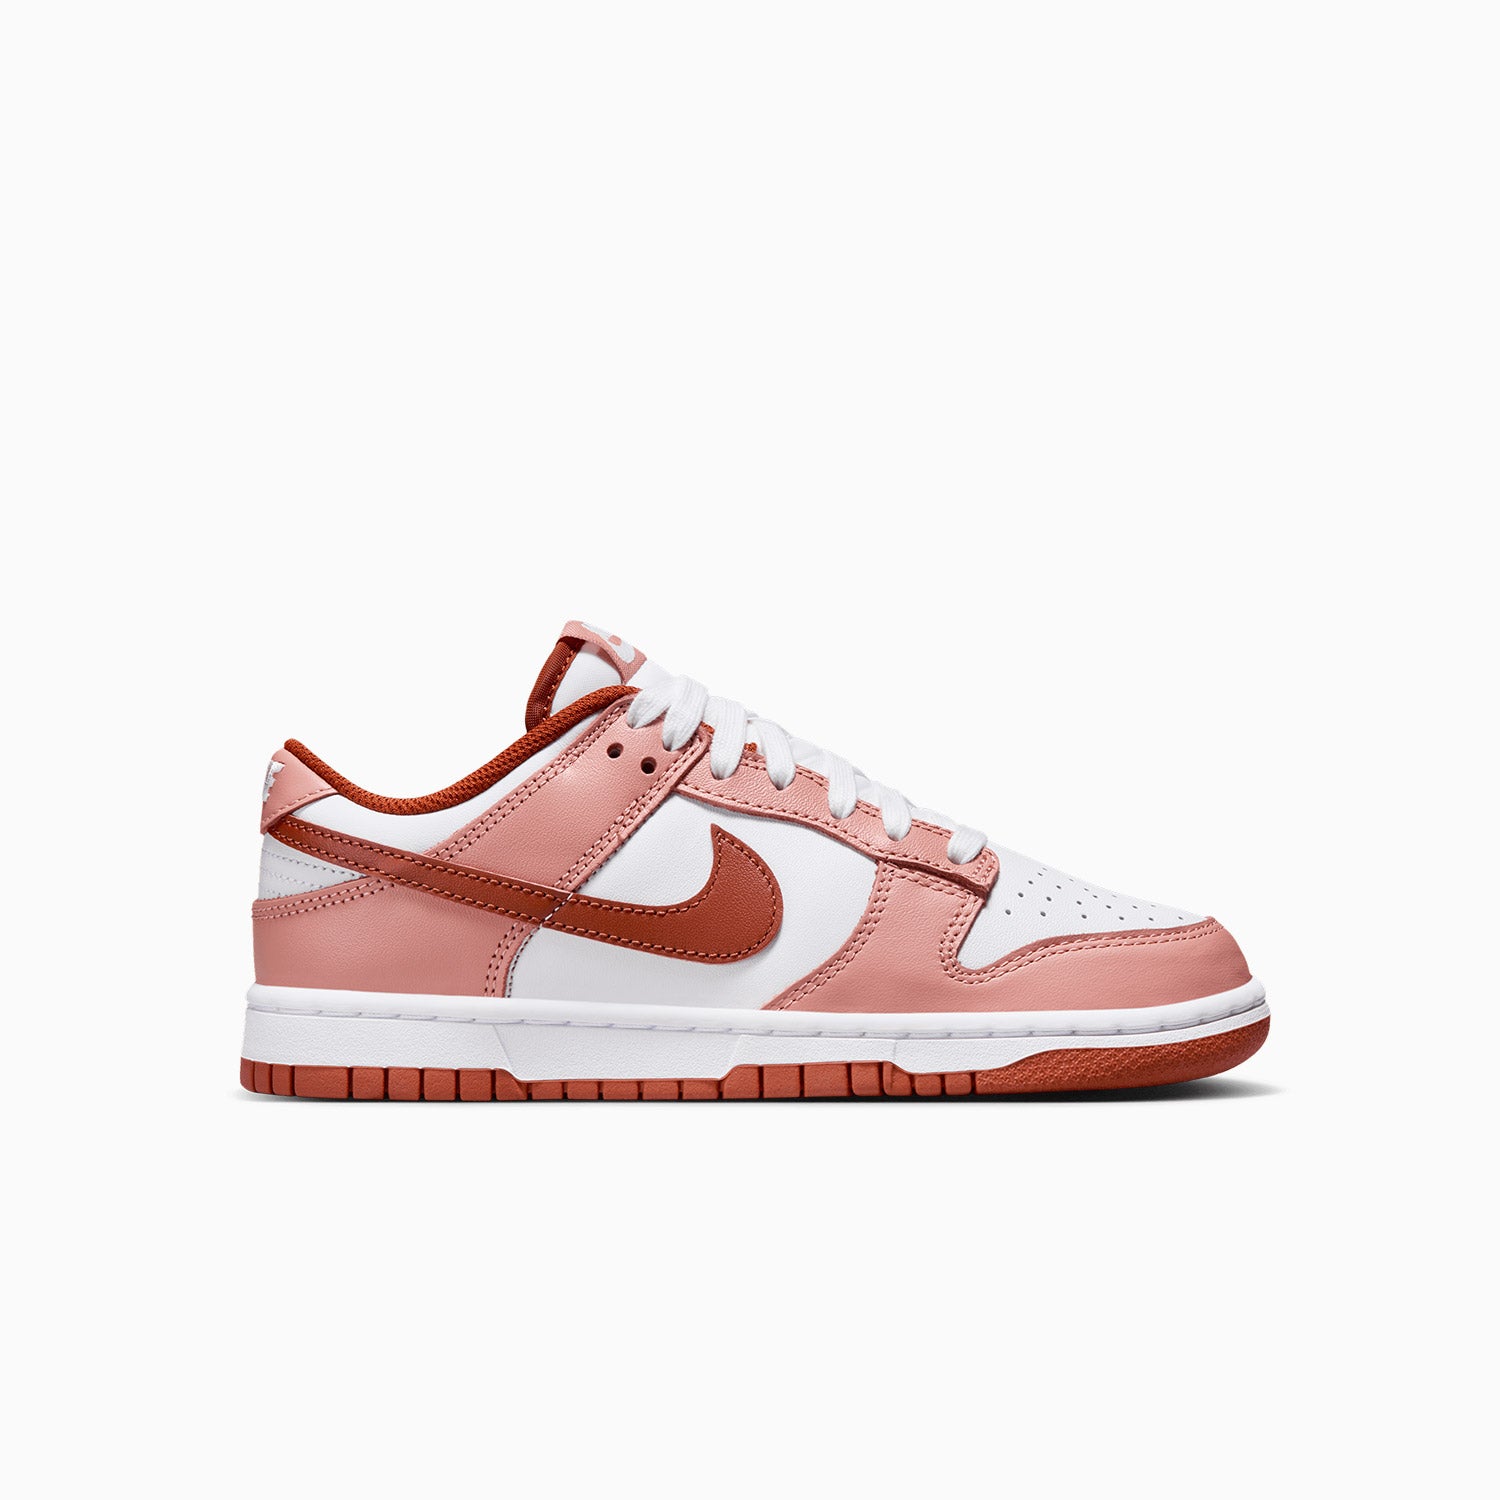 nike-womens-dunk-low-red-stardust-shoes-fq8876-618